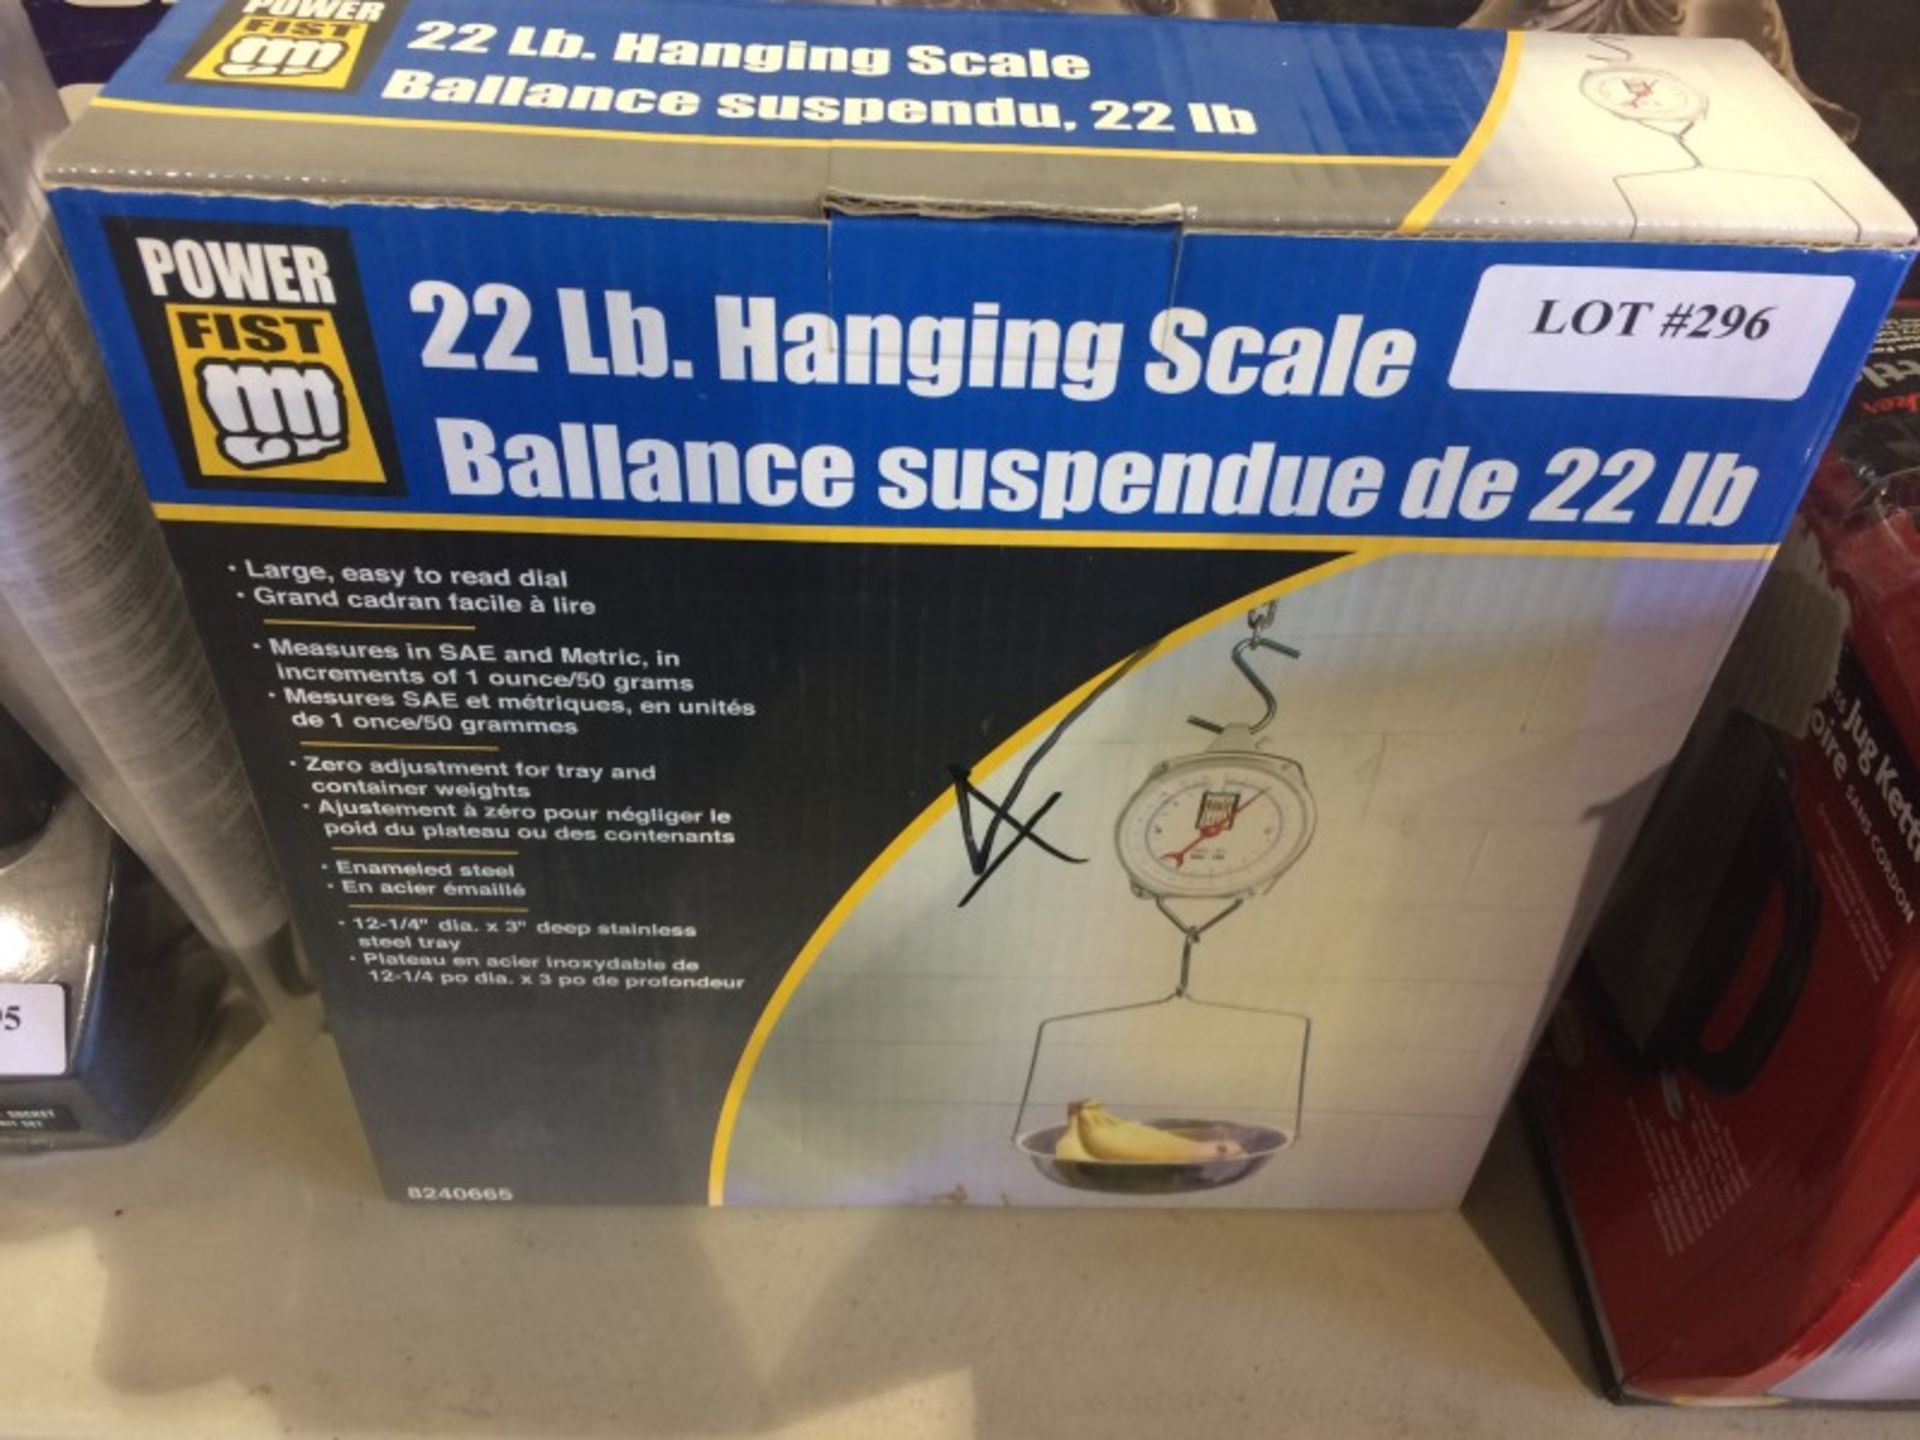 Powerfist 22lb Hanging Scale